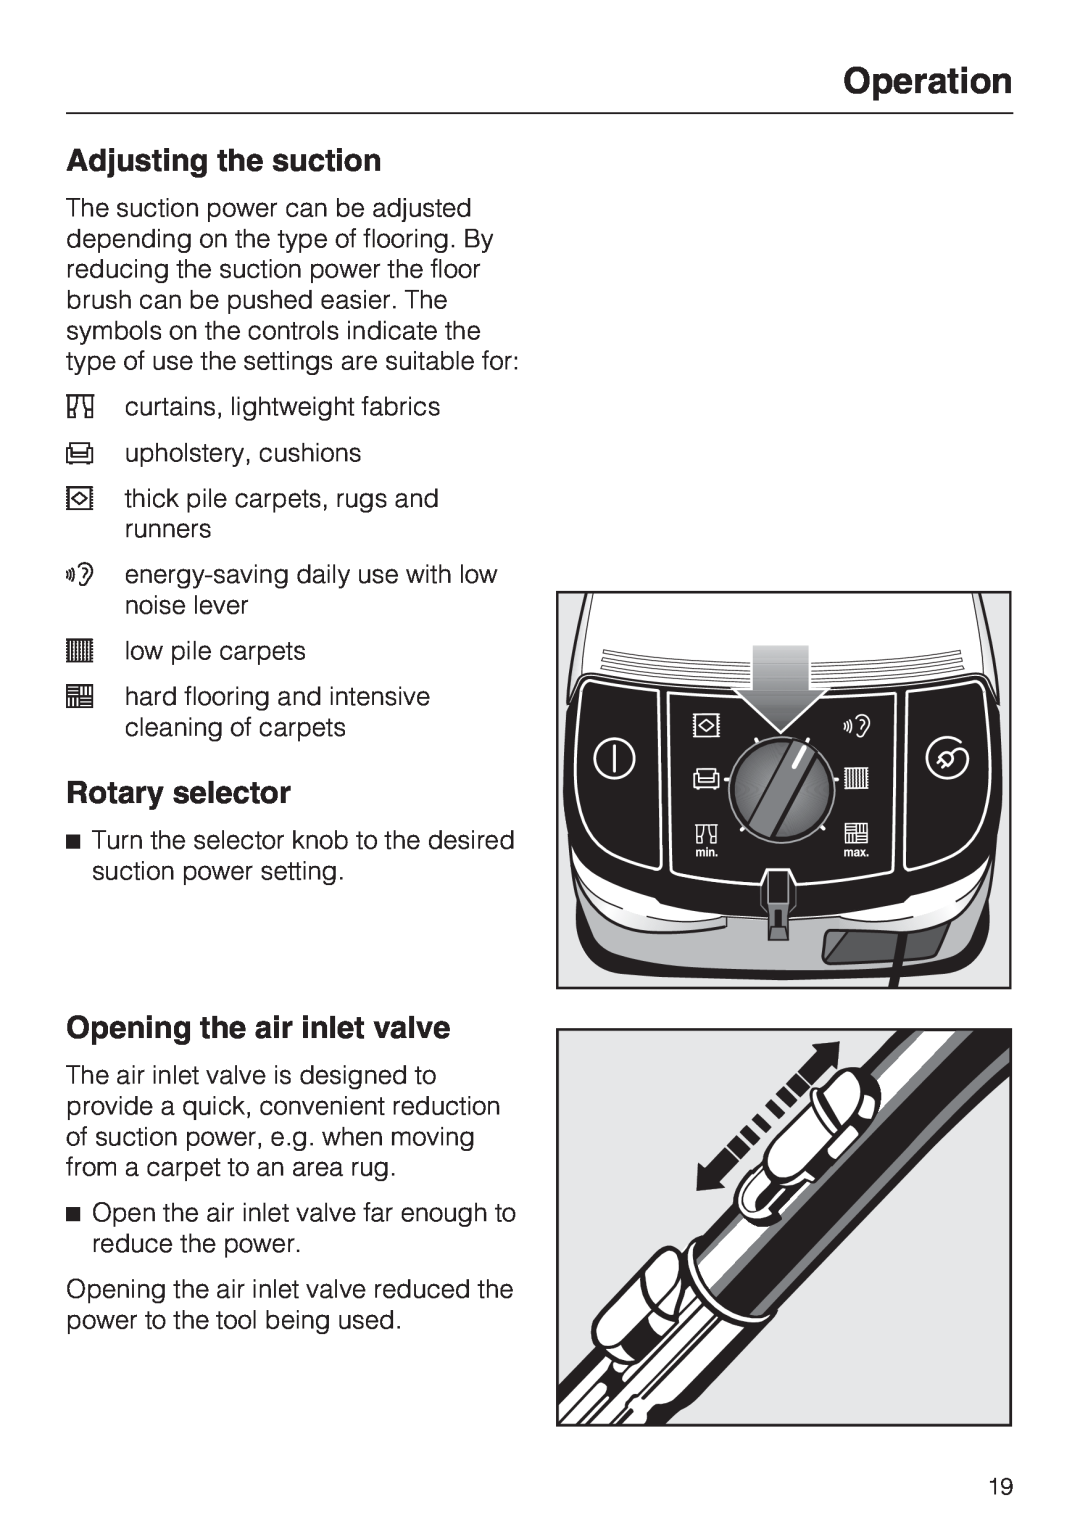 Miele S 768, S 700 manual Operation, Adjusting the suction, Rotary selector, Opening the air inlet valve 